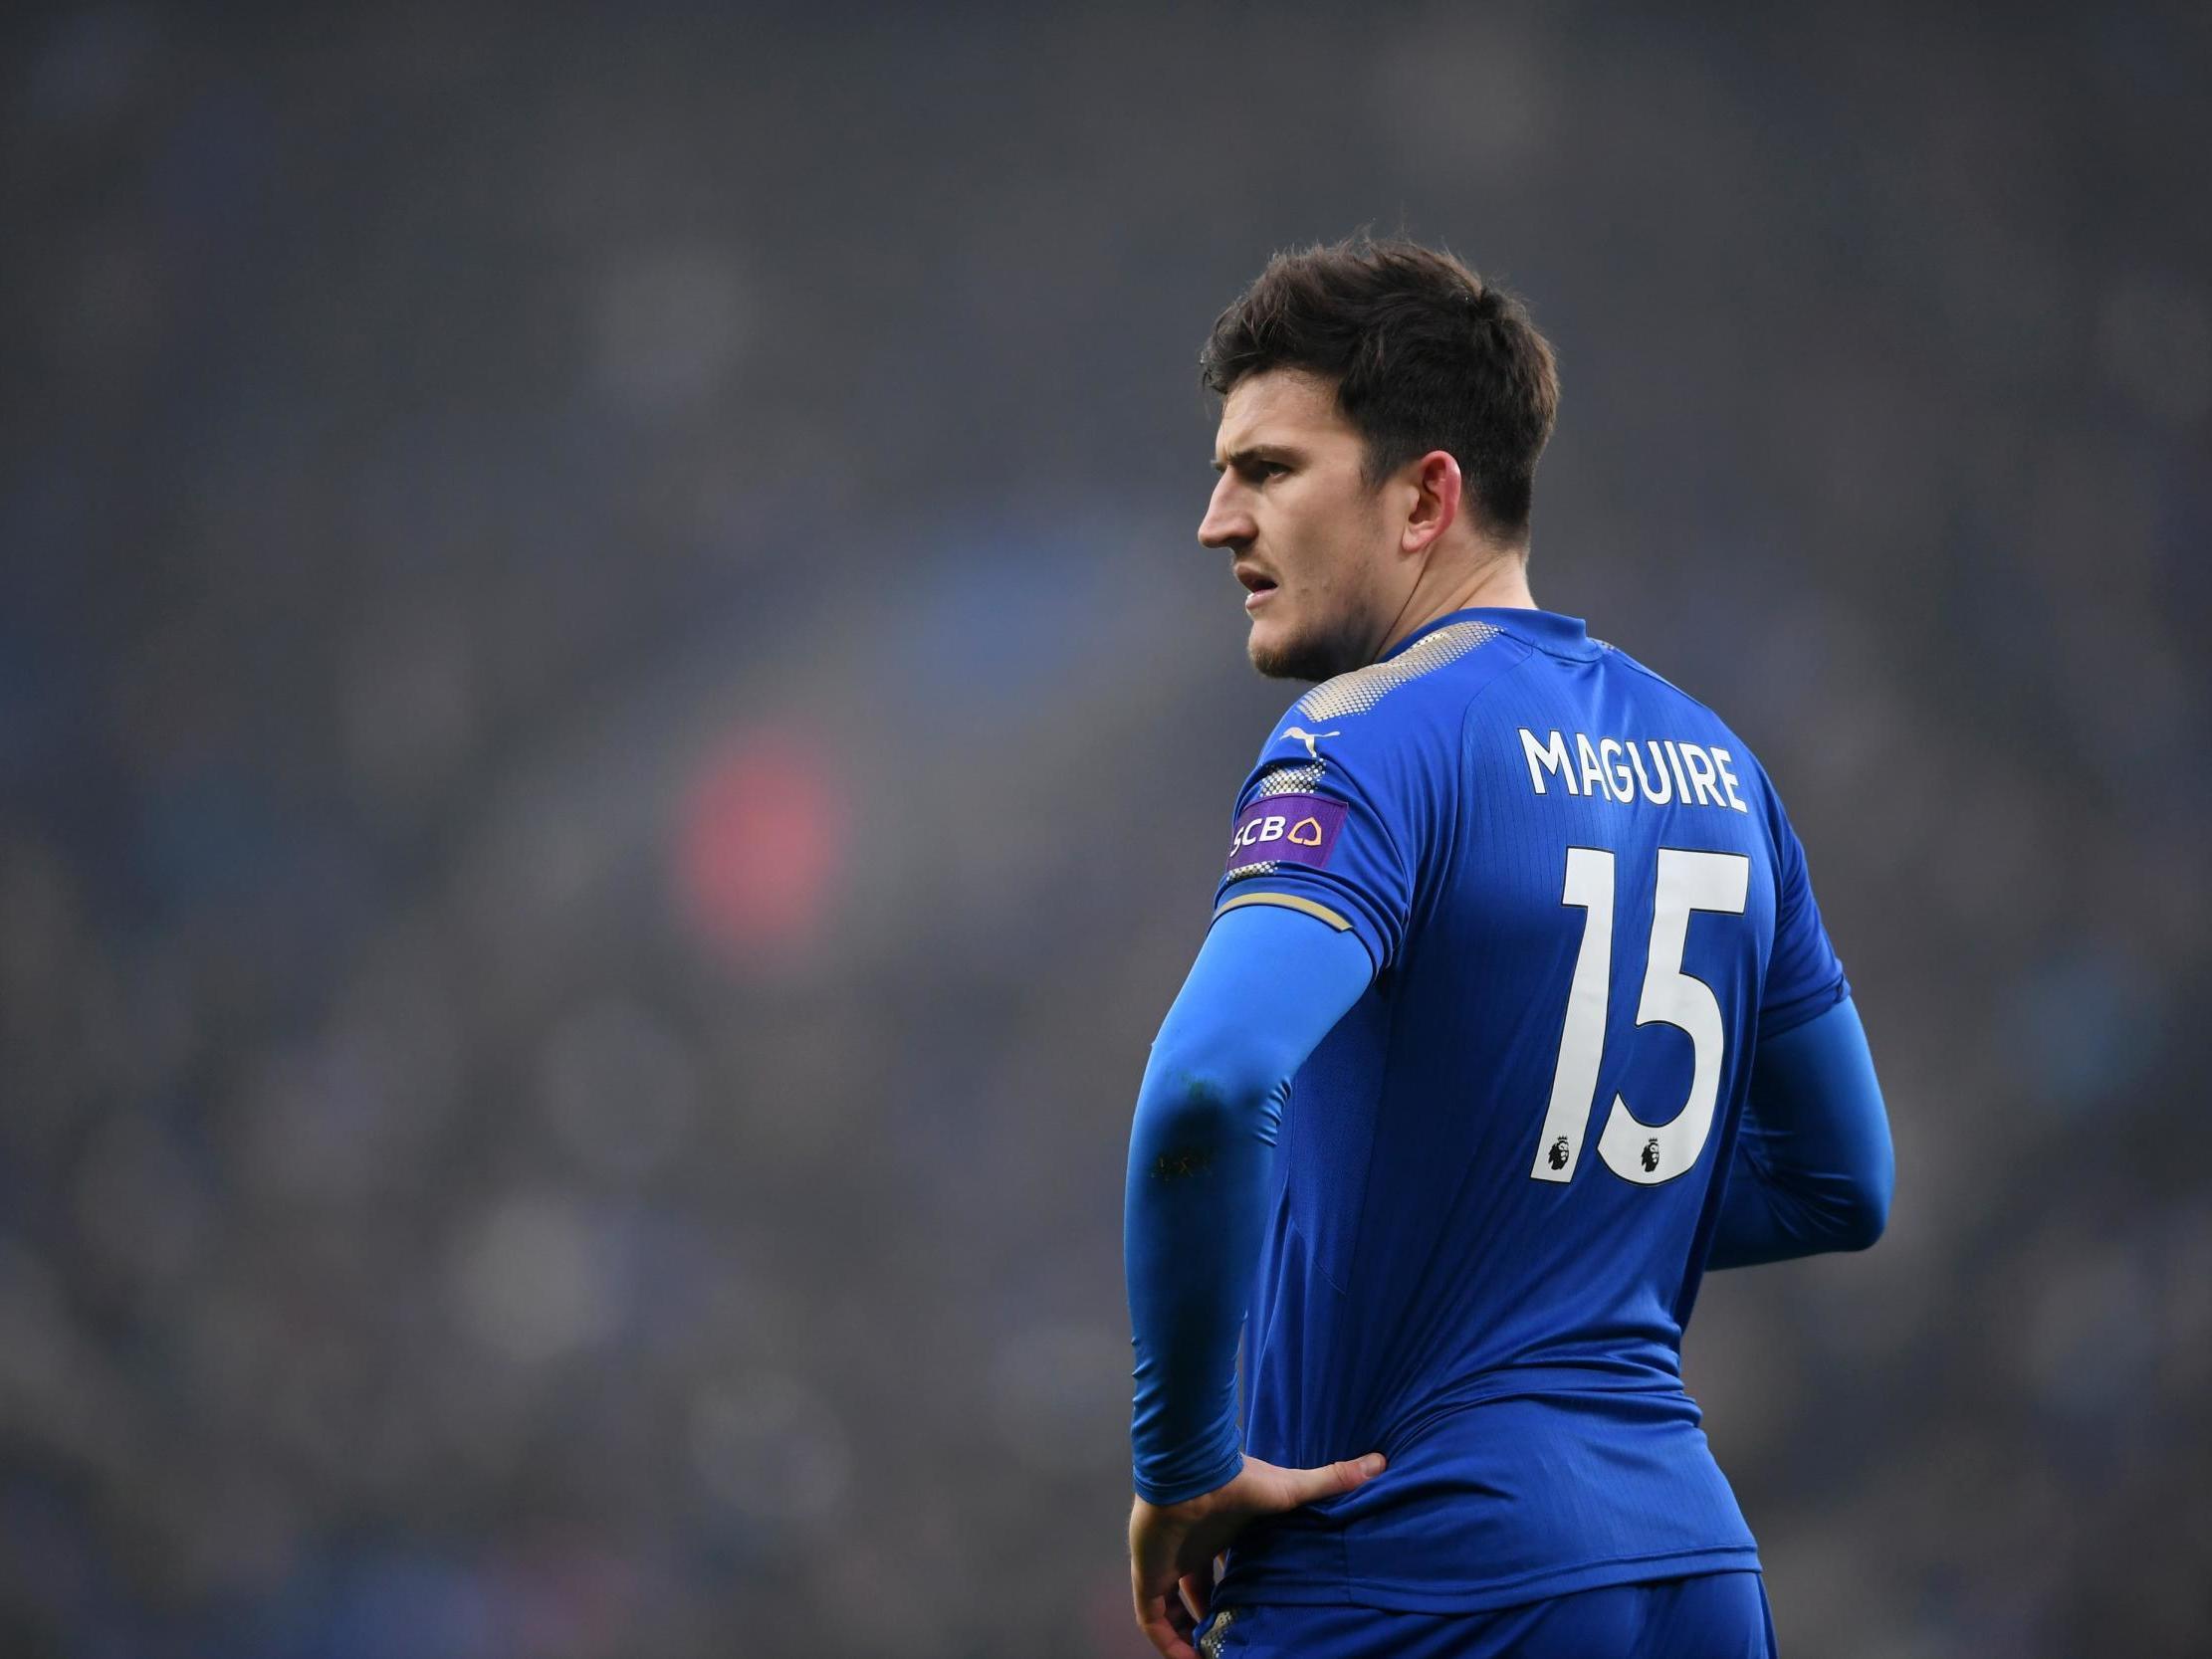  Harry Maguire Wallpapers Photos Pictures WhatsApp Status DP Ultra HD  Wallpaper Free Download